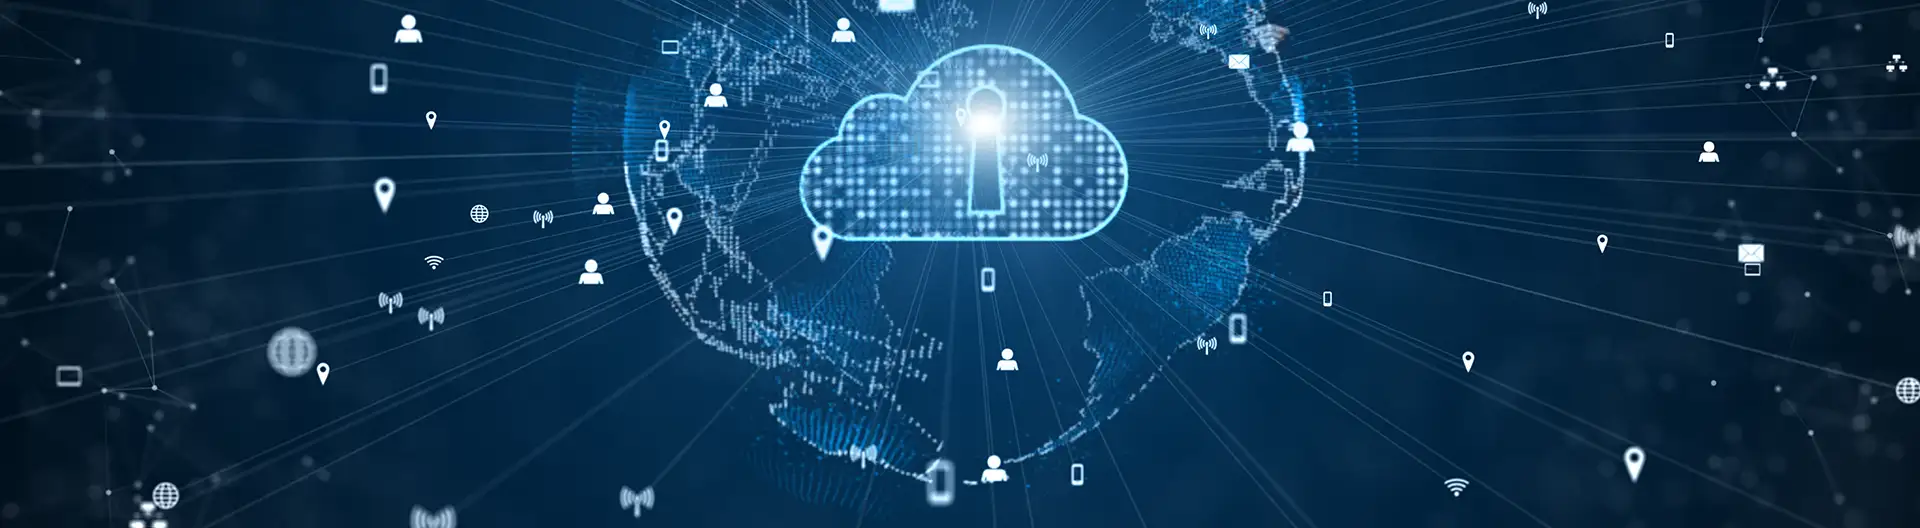 Cloud Cybersecurity for Enterprises: 3 Essential Steps - Banner